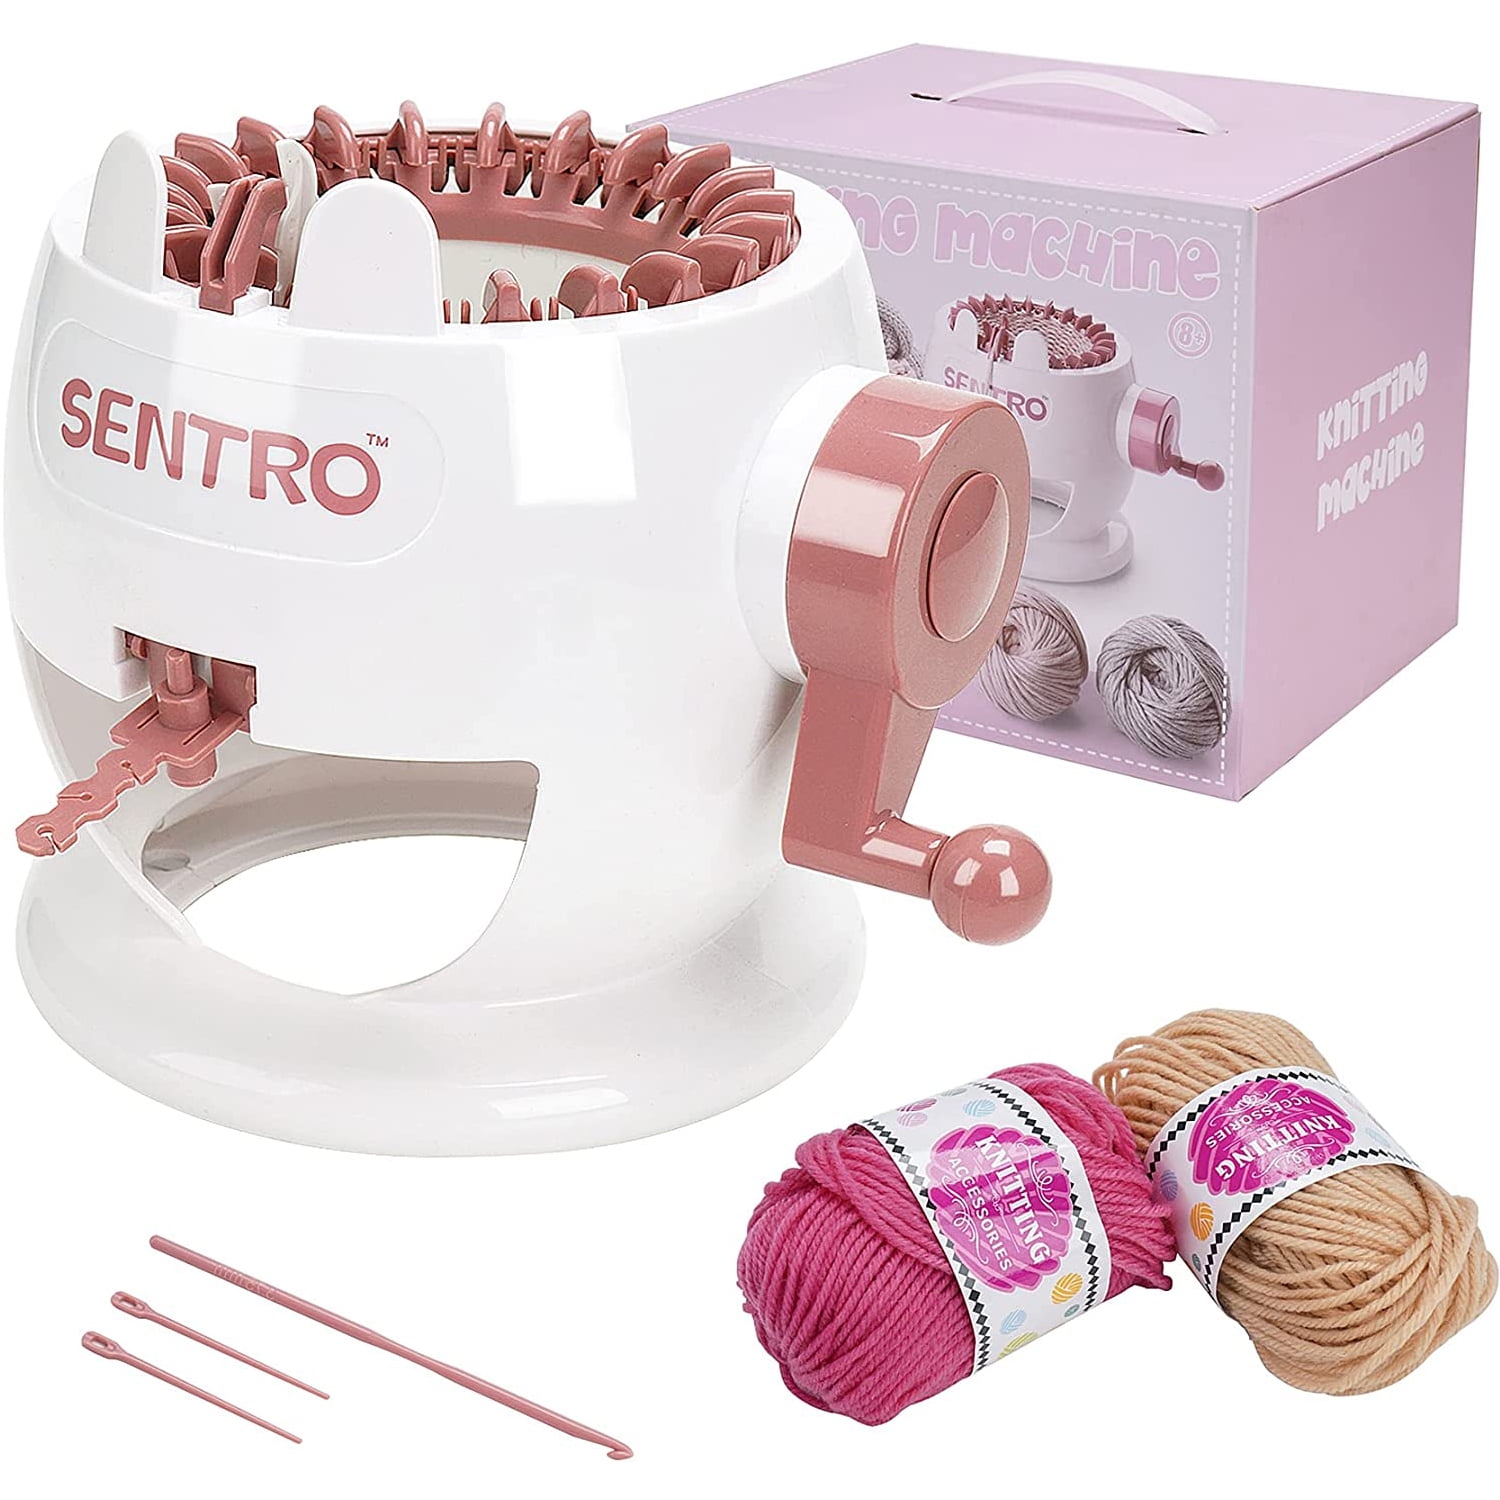 Besly Kid Girls 22 Needles Knitting Machine Toys Smart 48 Needles Hand-knitted Round Loom Machine Toys for 5-12 Year Old, Red